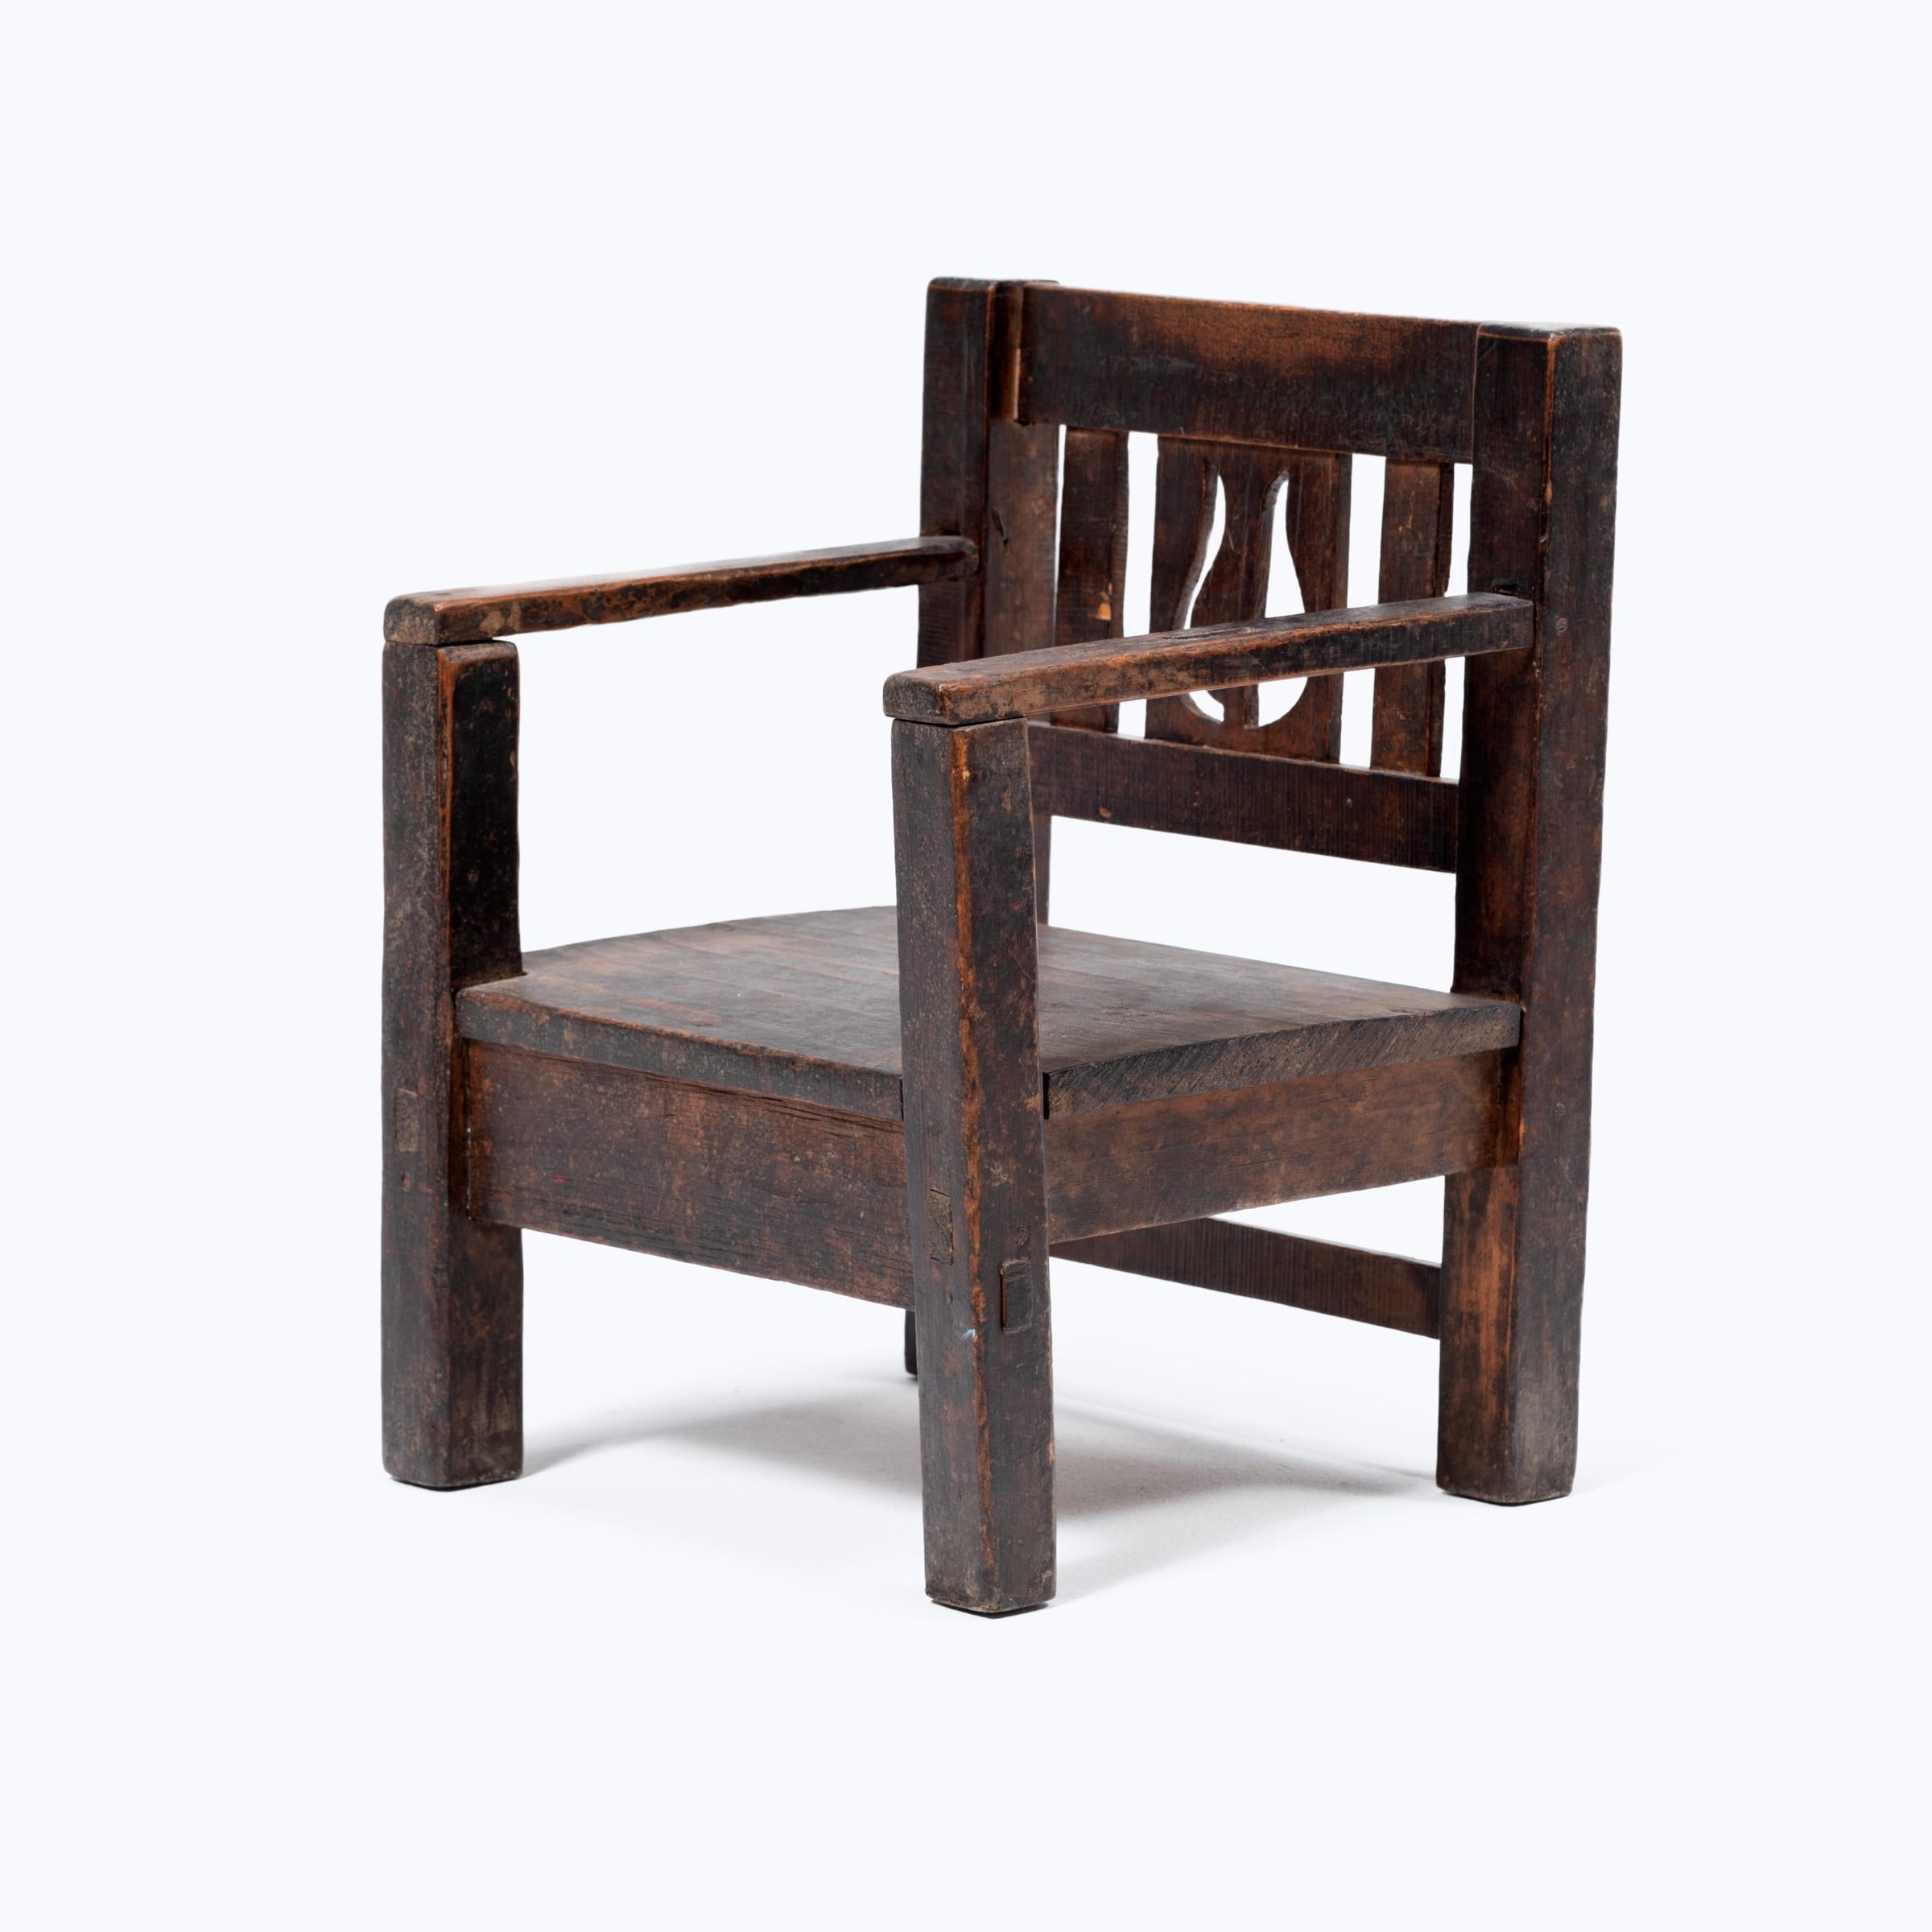 Rustic Early 20th Century Guatemalan Child's Chair